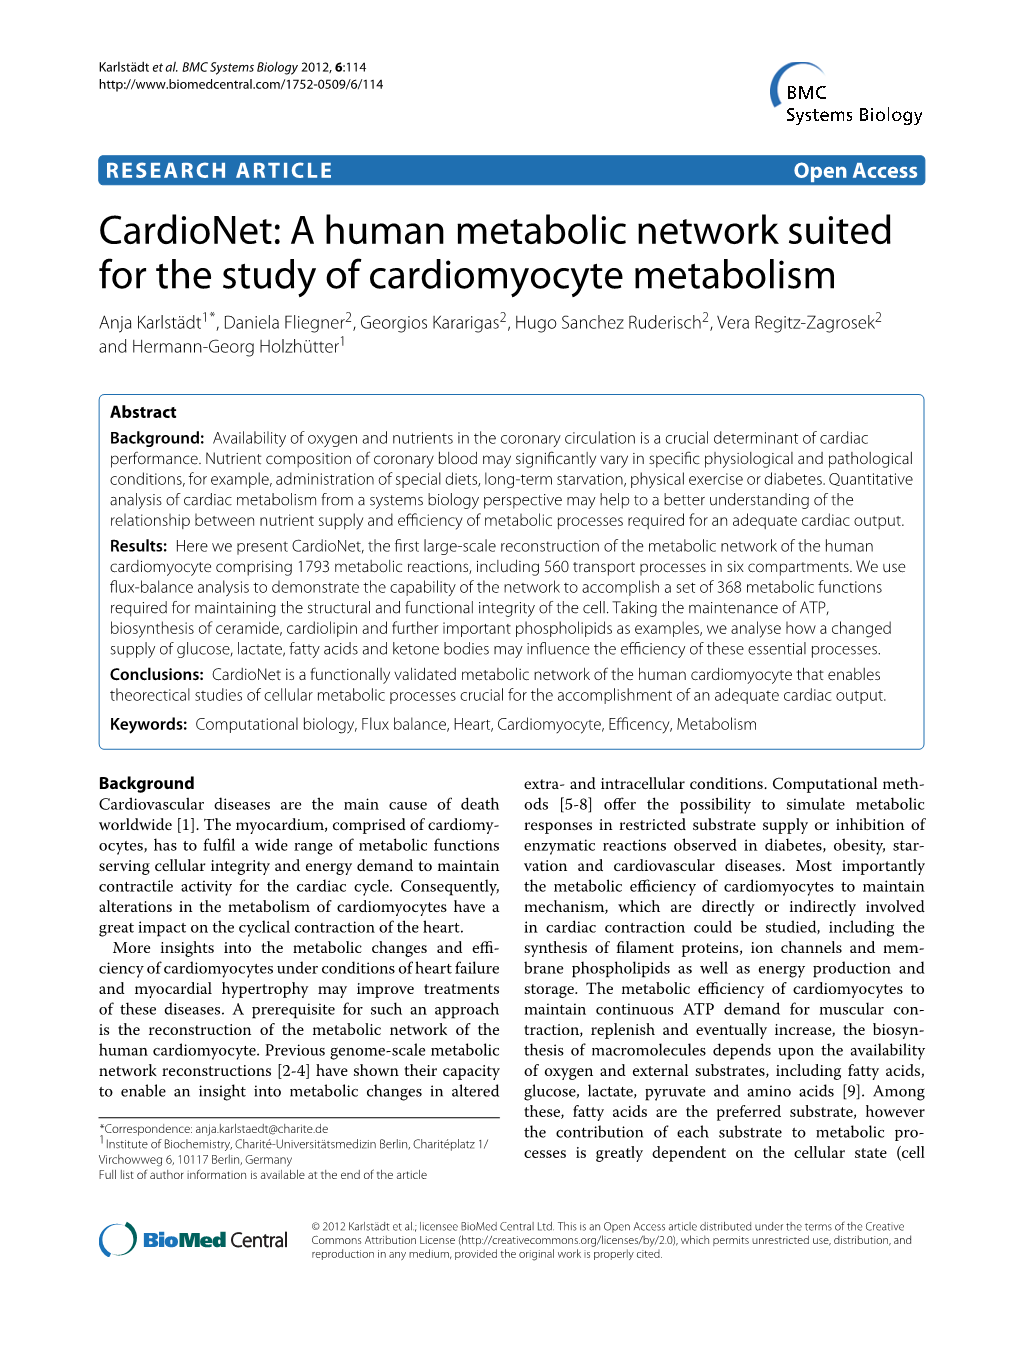 Cardionet: a Human Metabolic Network Suited for the Study Of